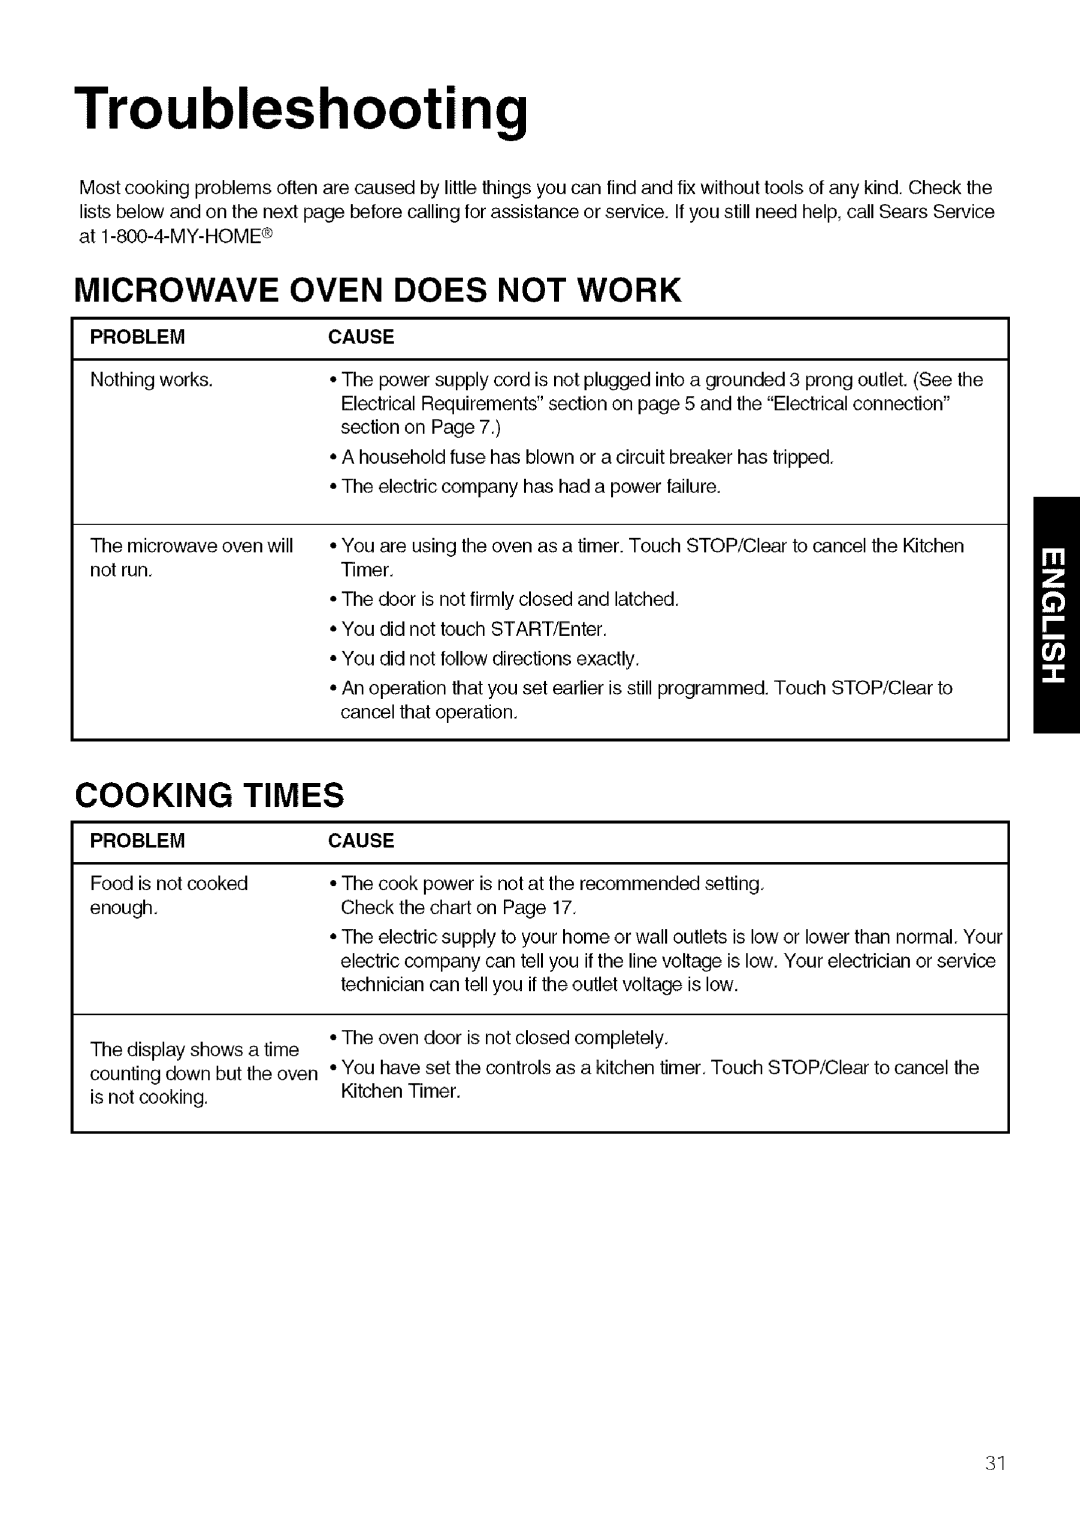 Kenmore 721.80604, 721.80603, 721.80602 manual Troubleshooting, Microwave Oven Does Not Work, Cooking Times, Problemcause 